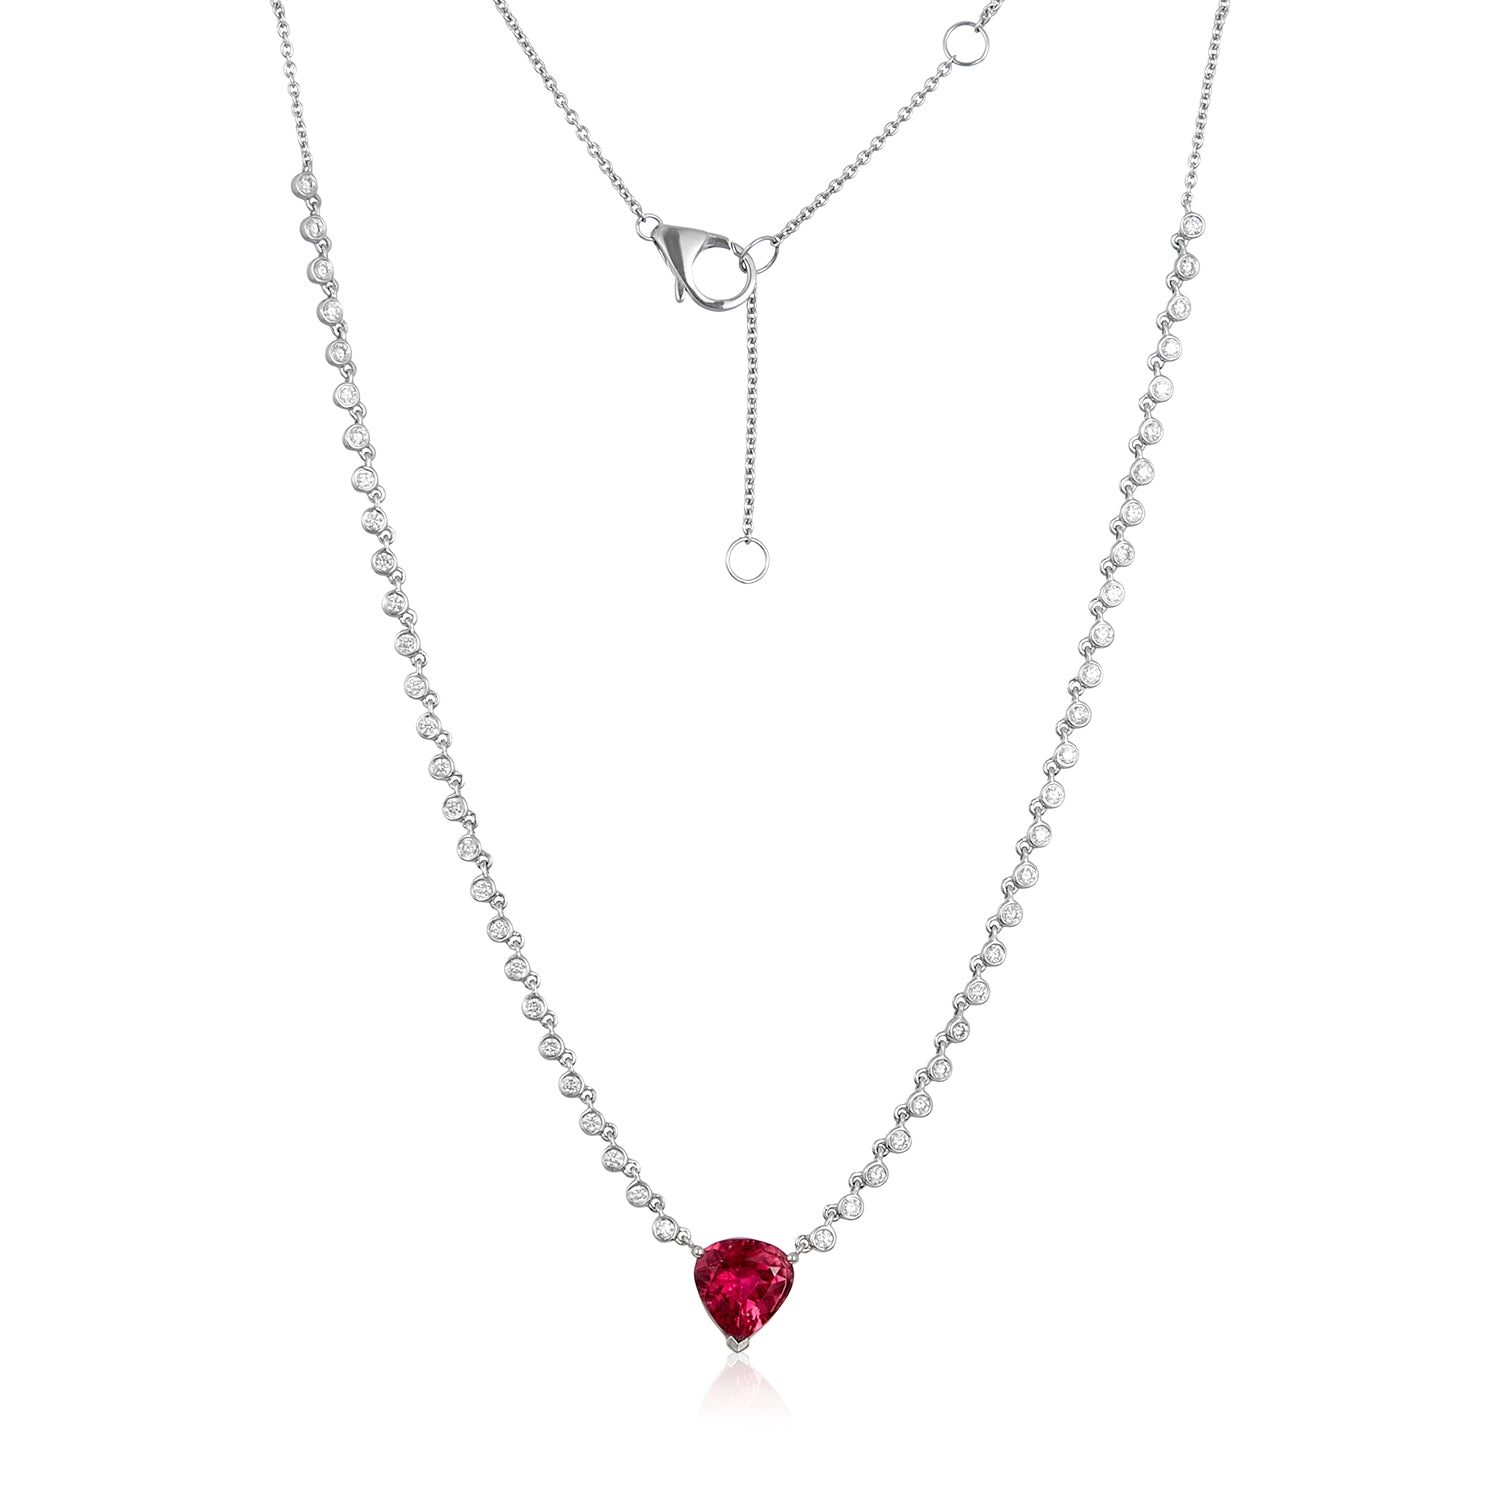 Hearty Pink Tourmaline Diamond Chain Necklace in 18k